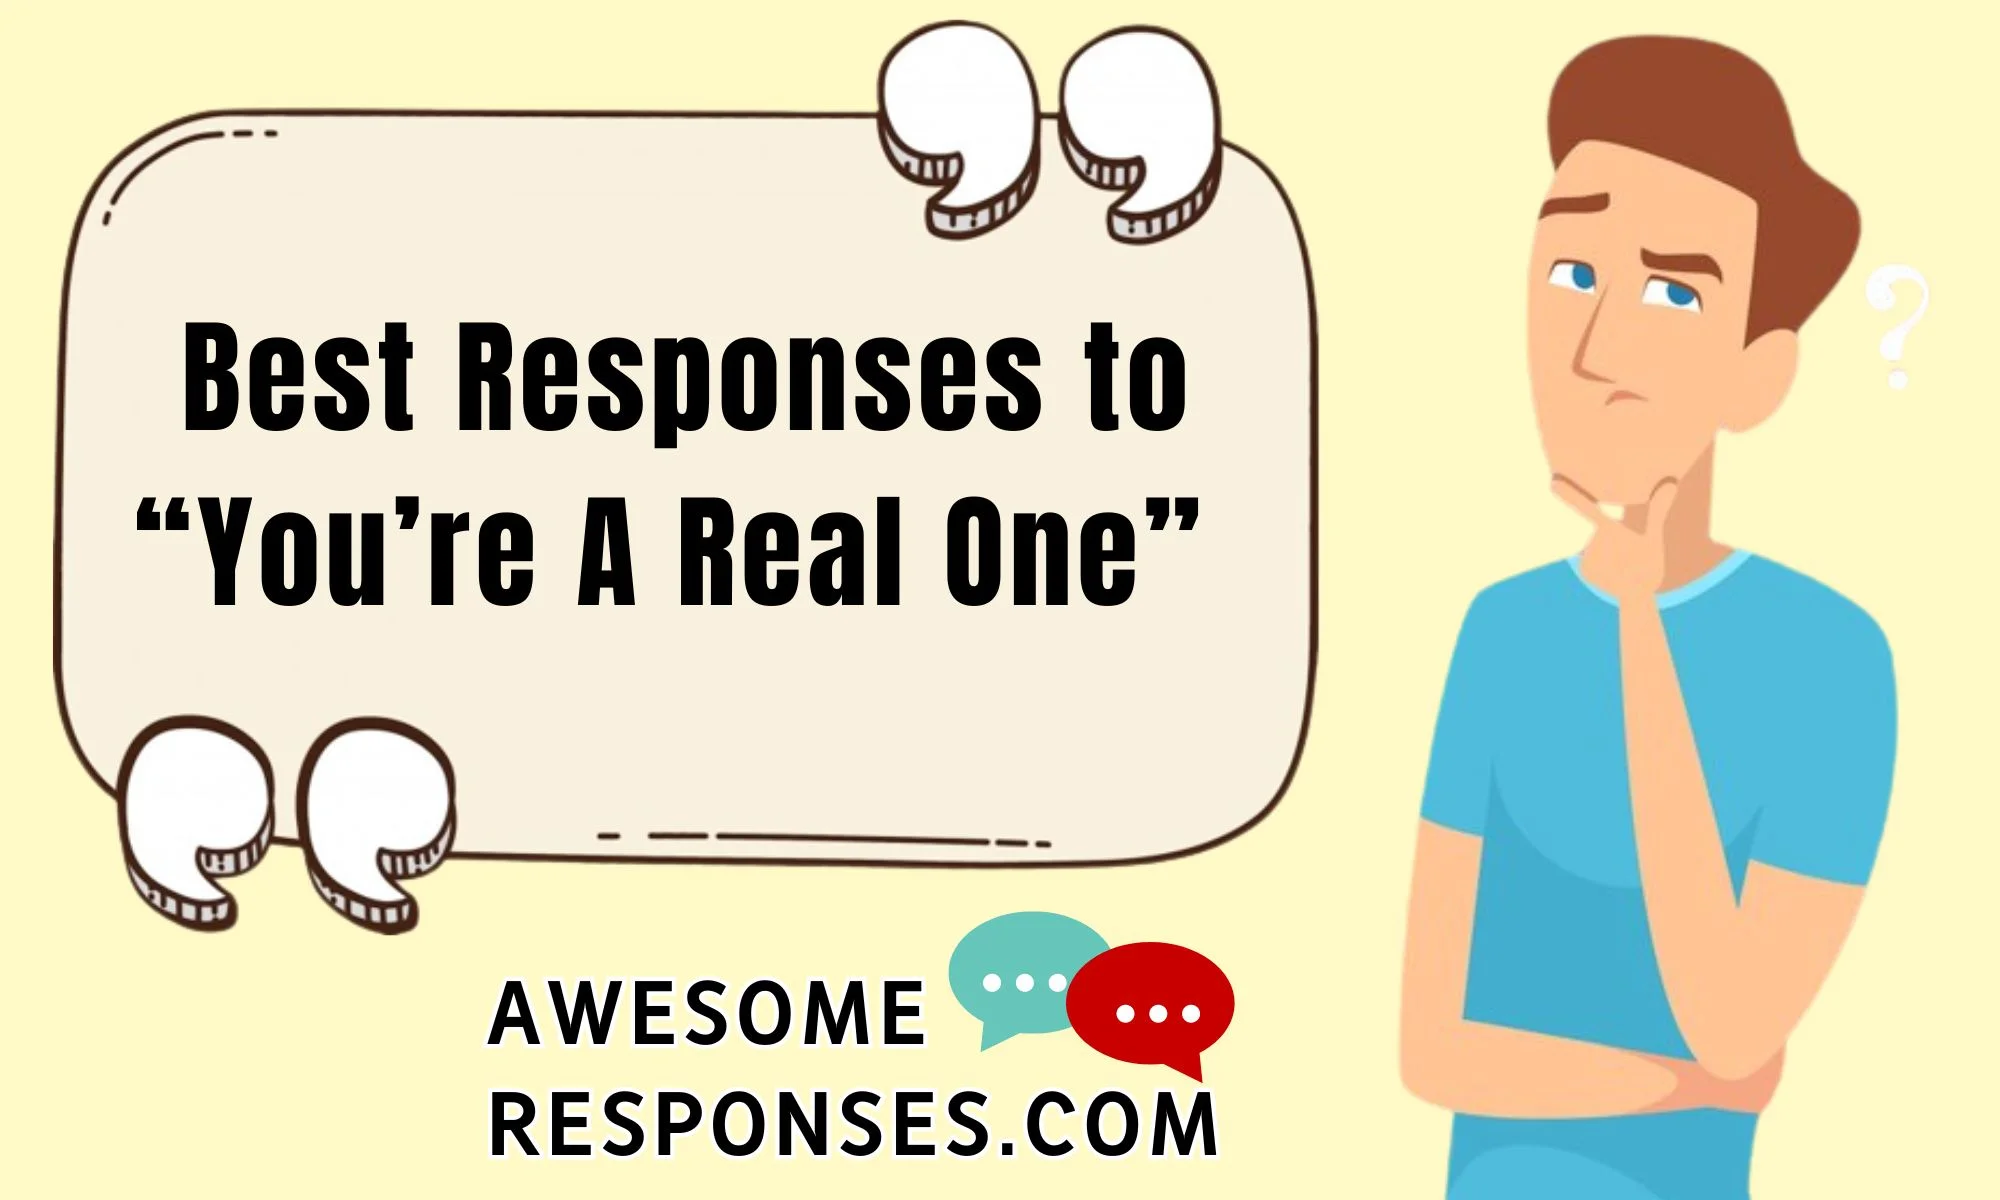 Best Responses to “You’re A Real One”